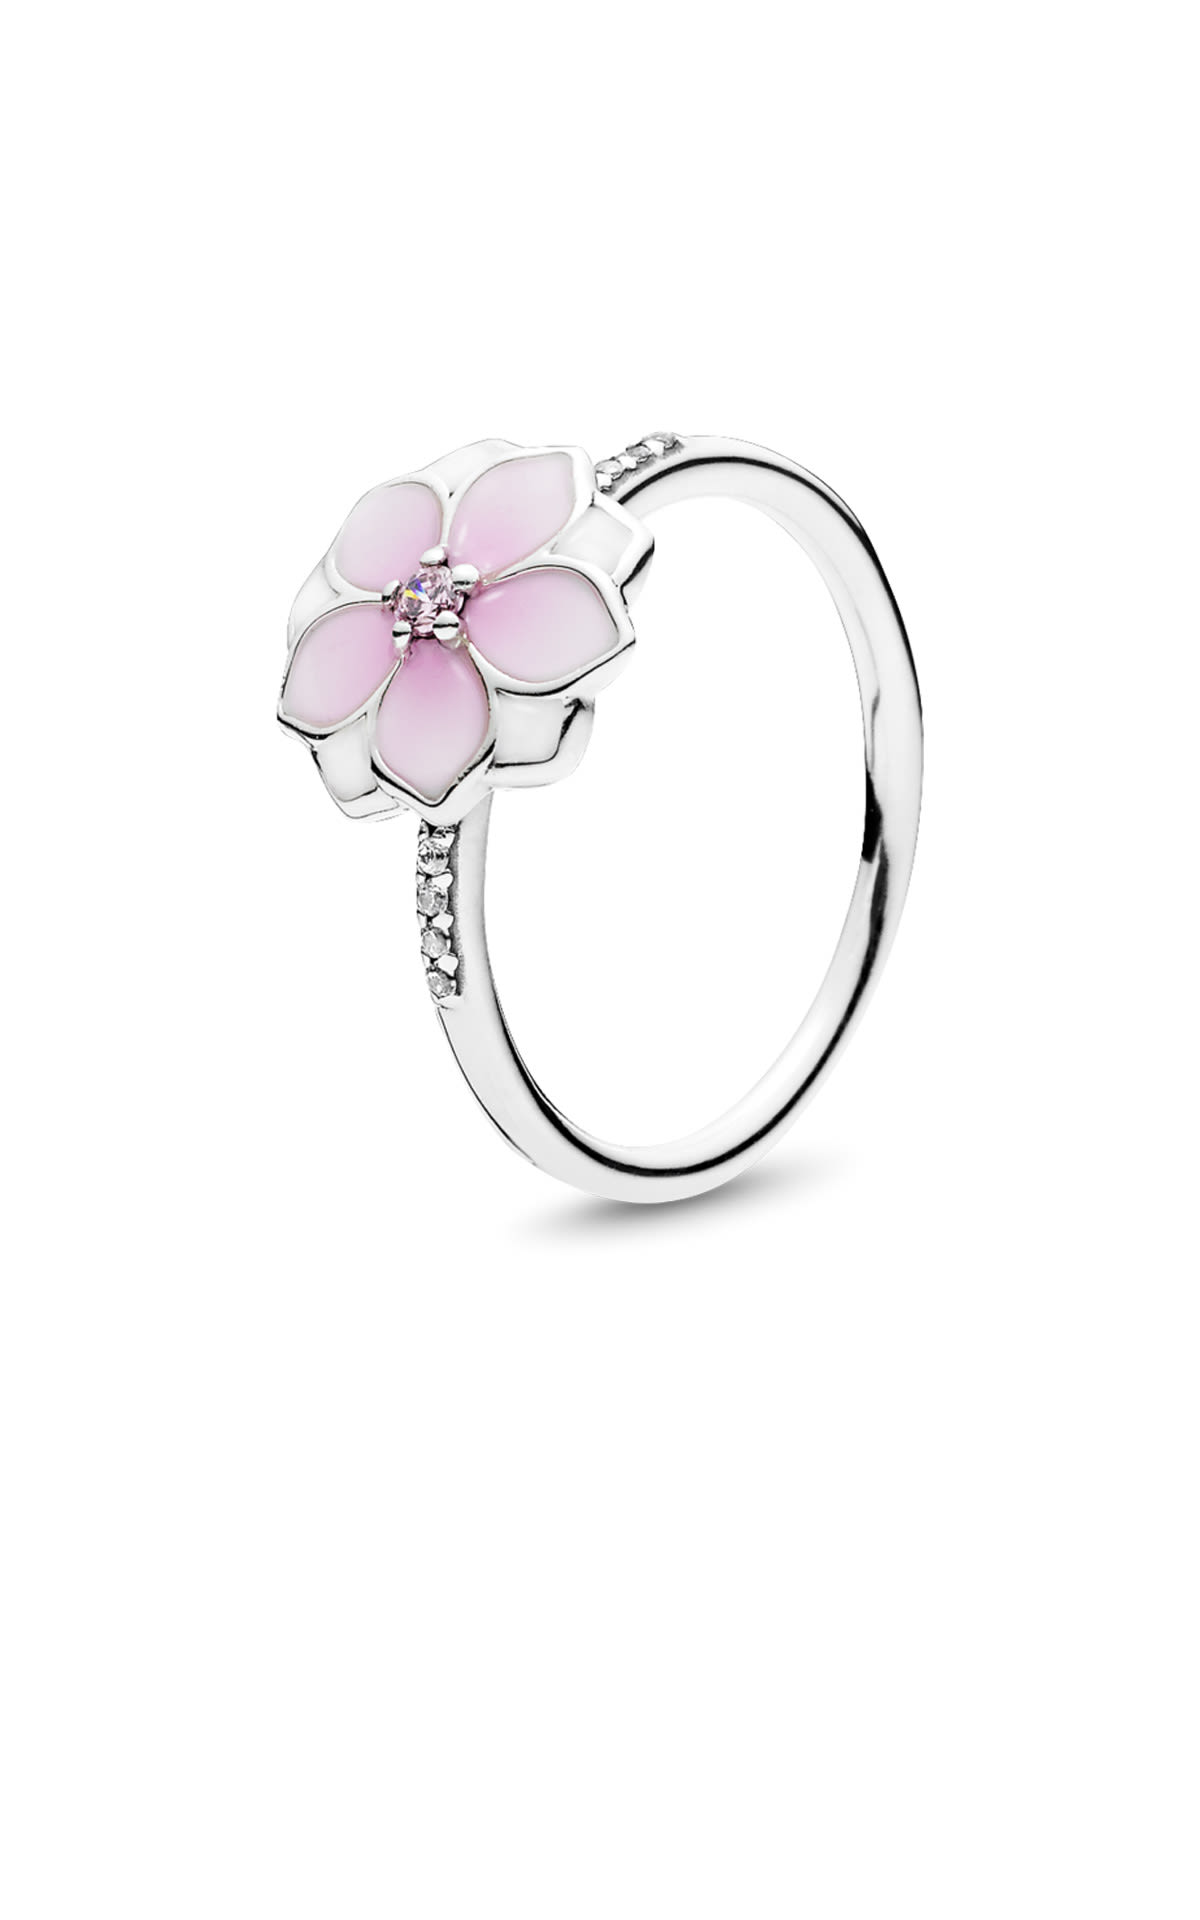 Shiny silver ring with flower Pandora